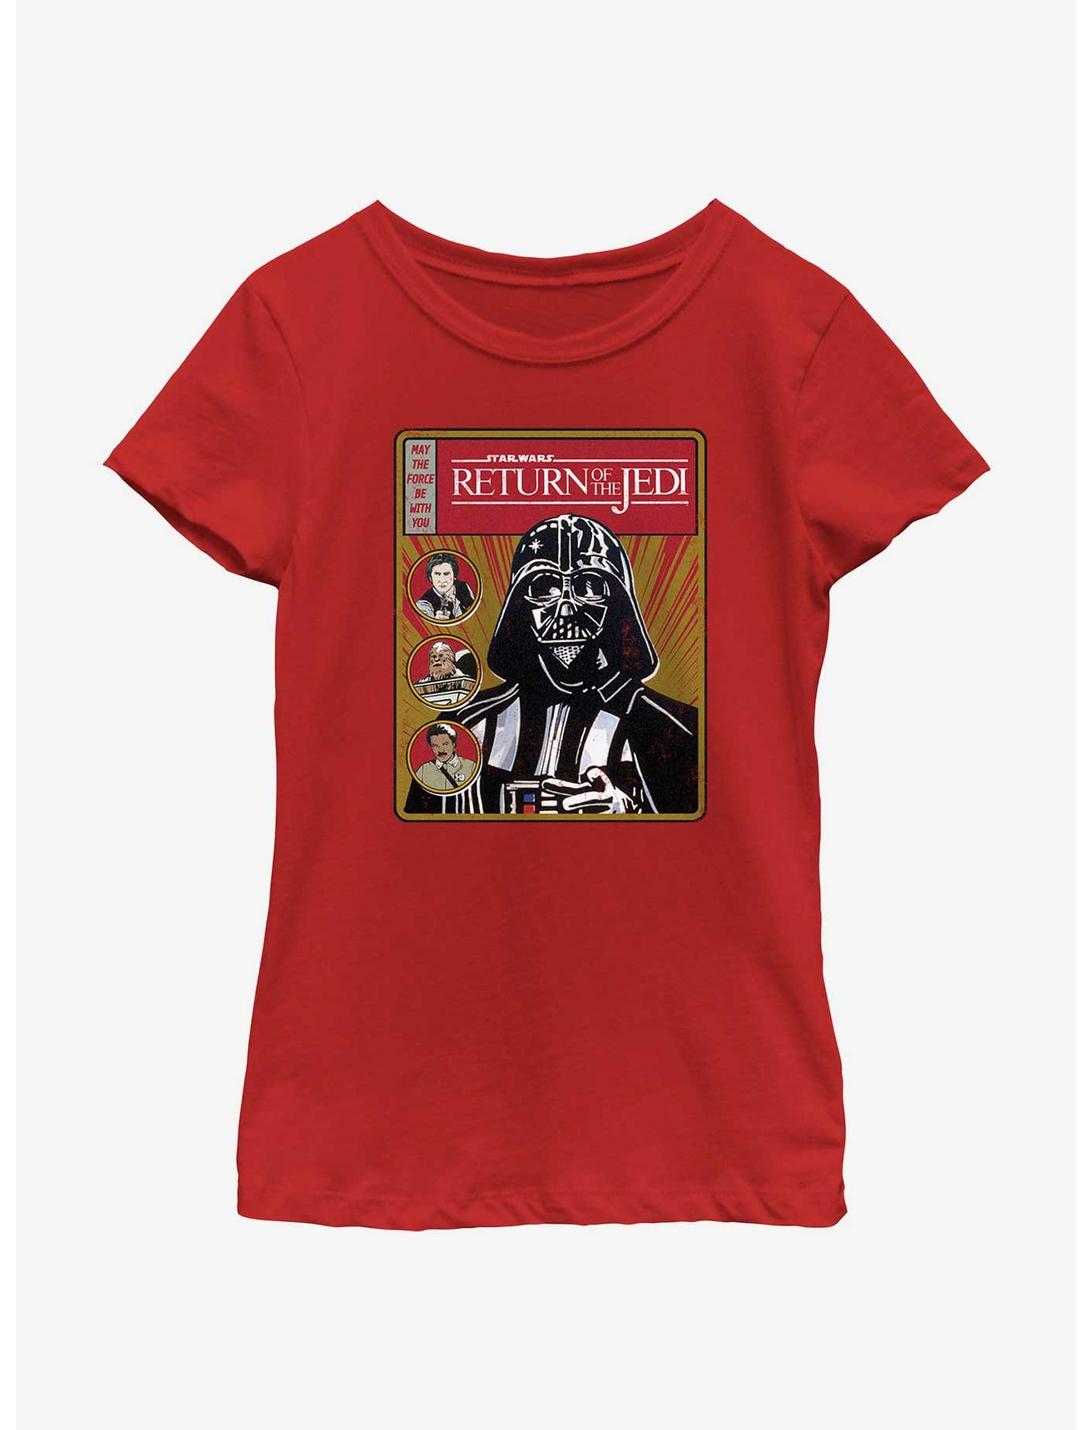 Star Wars Return Of The Jedi Vader Cover Youth Girls T-Shirt, RED, hi-res